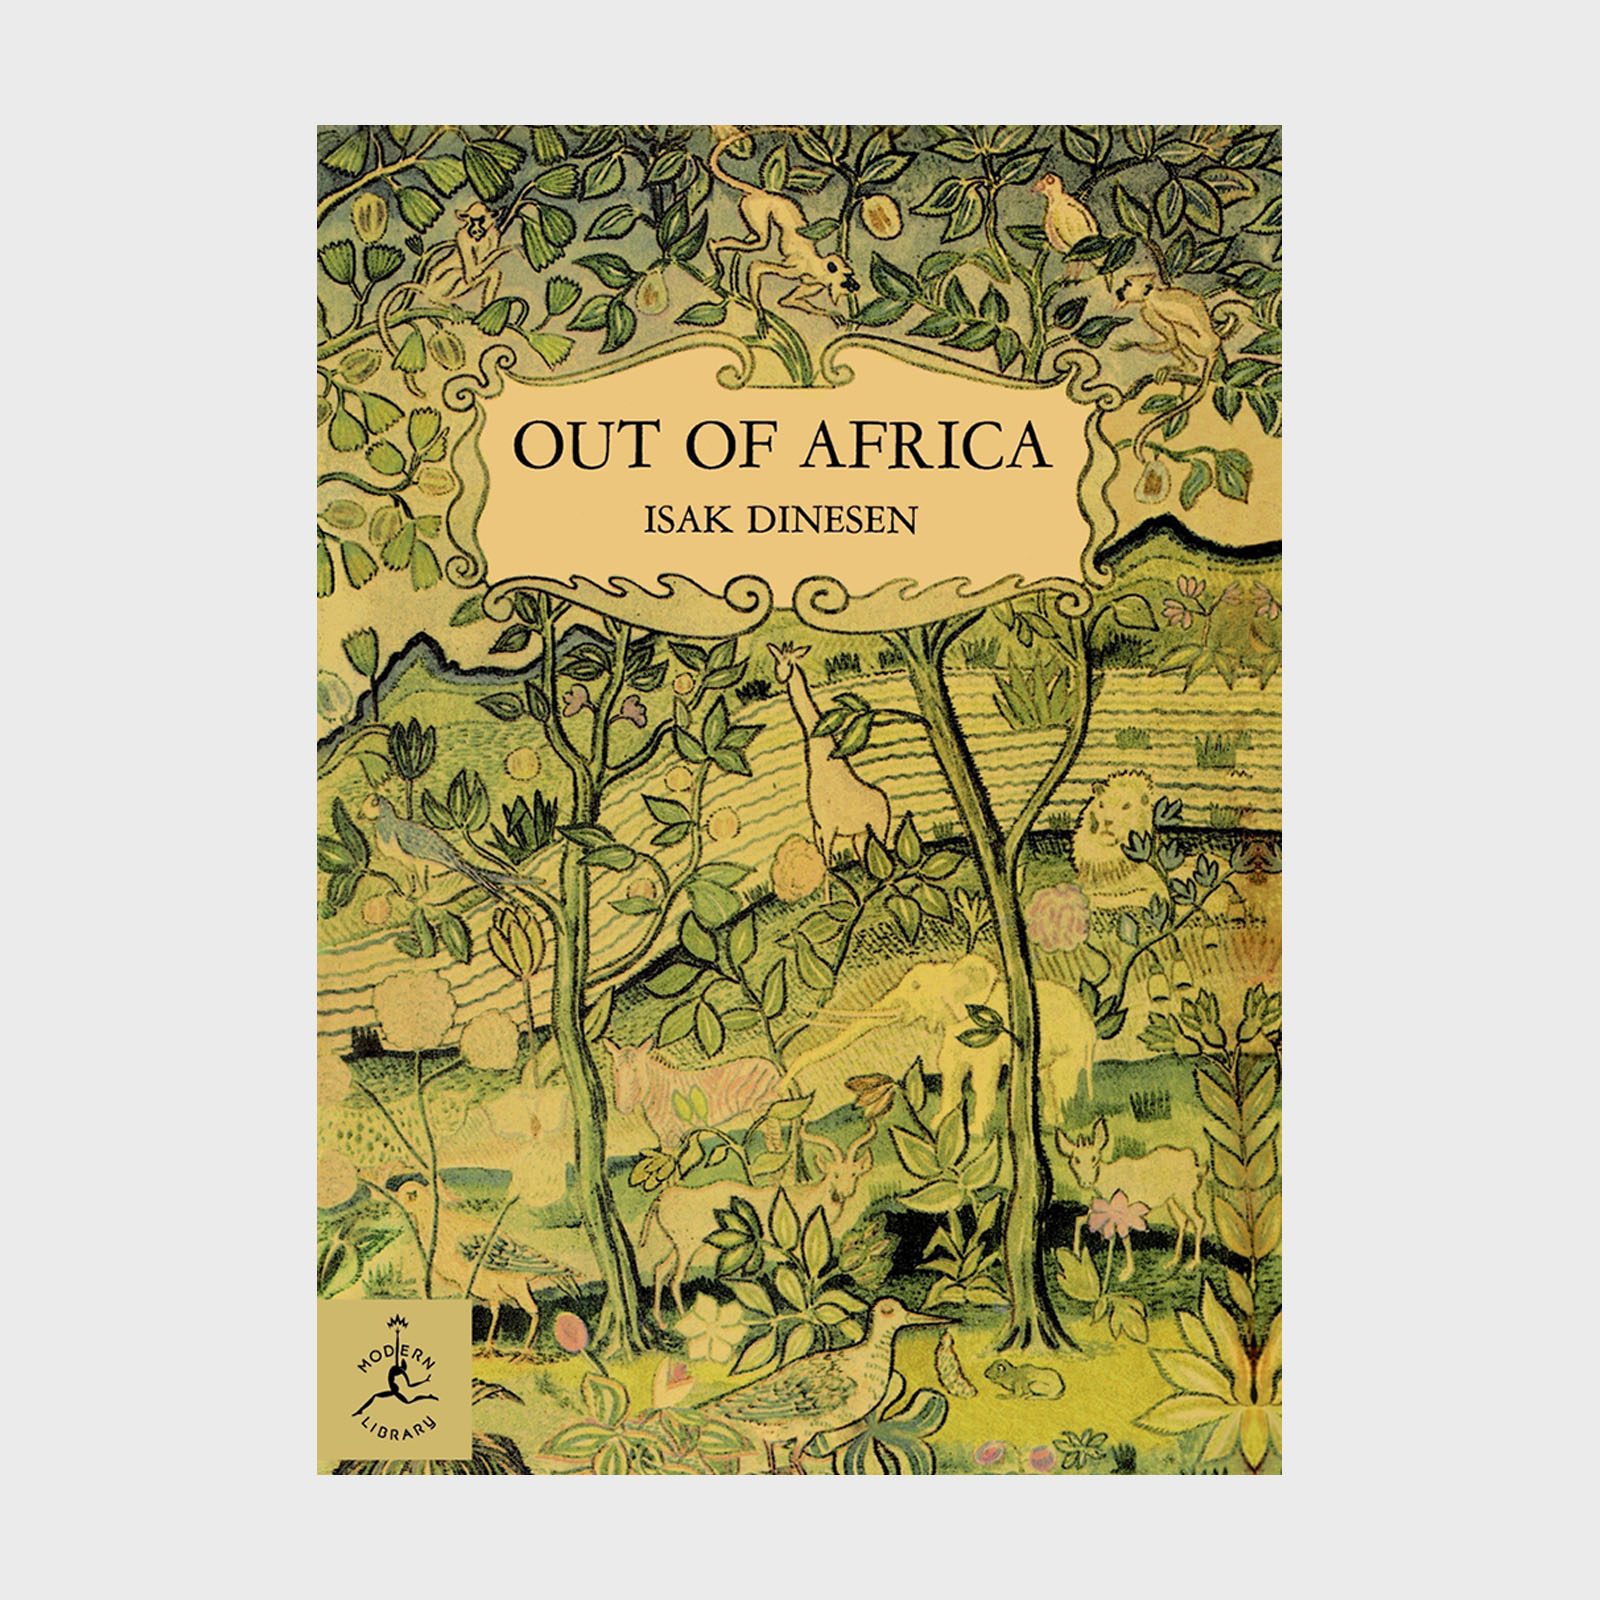 45 Out Of Africa By Isak Dinesen Via Amazon